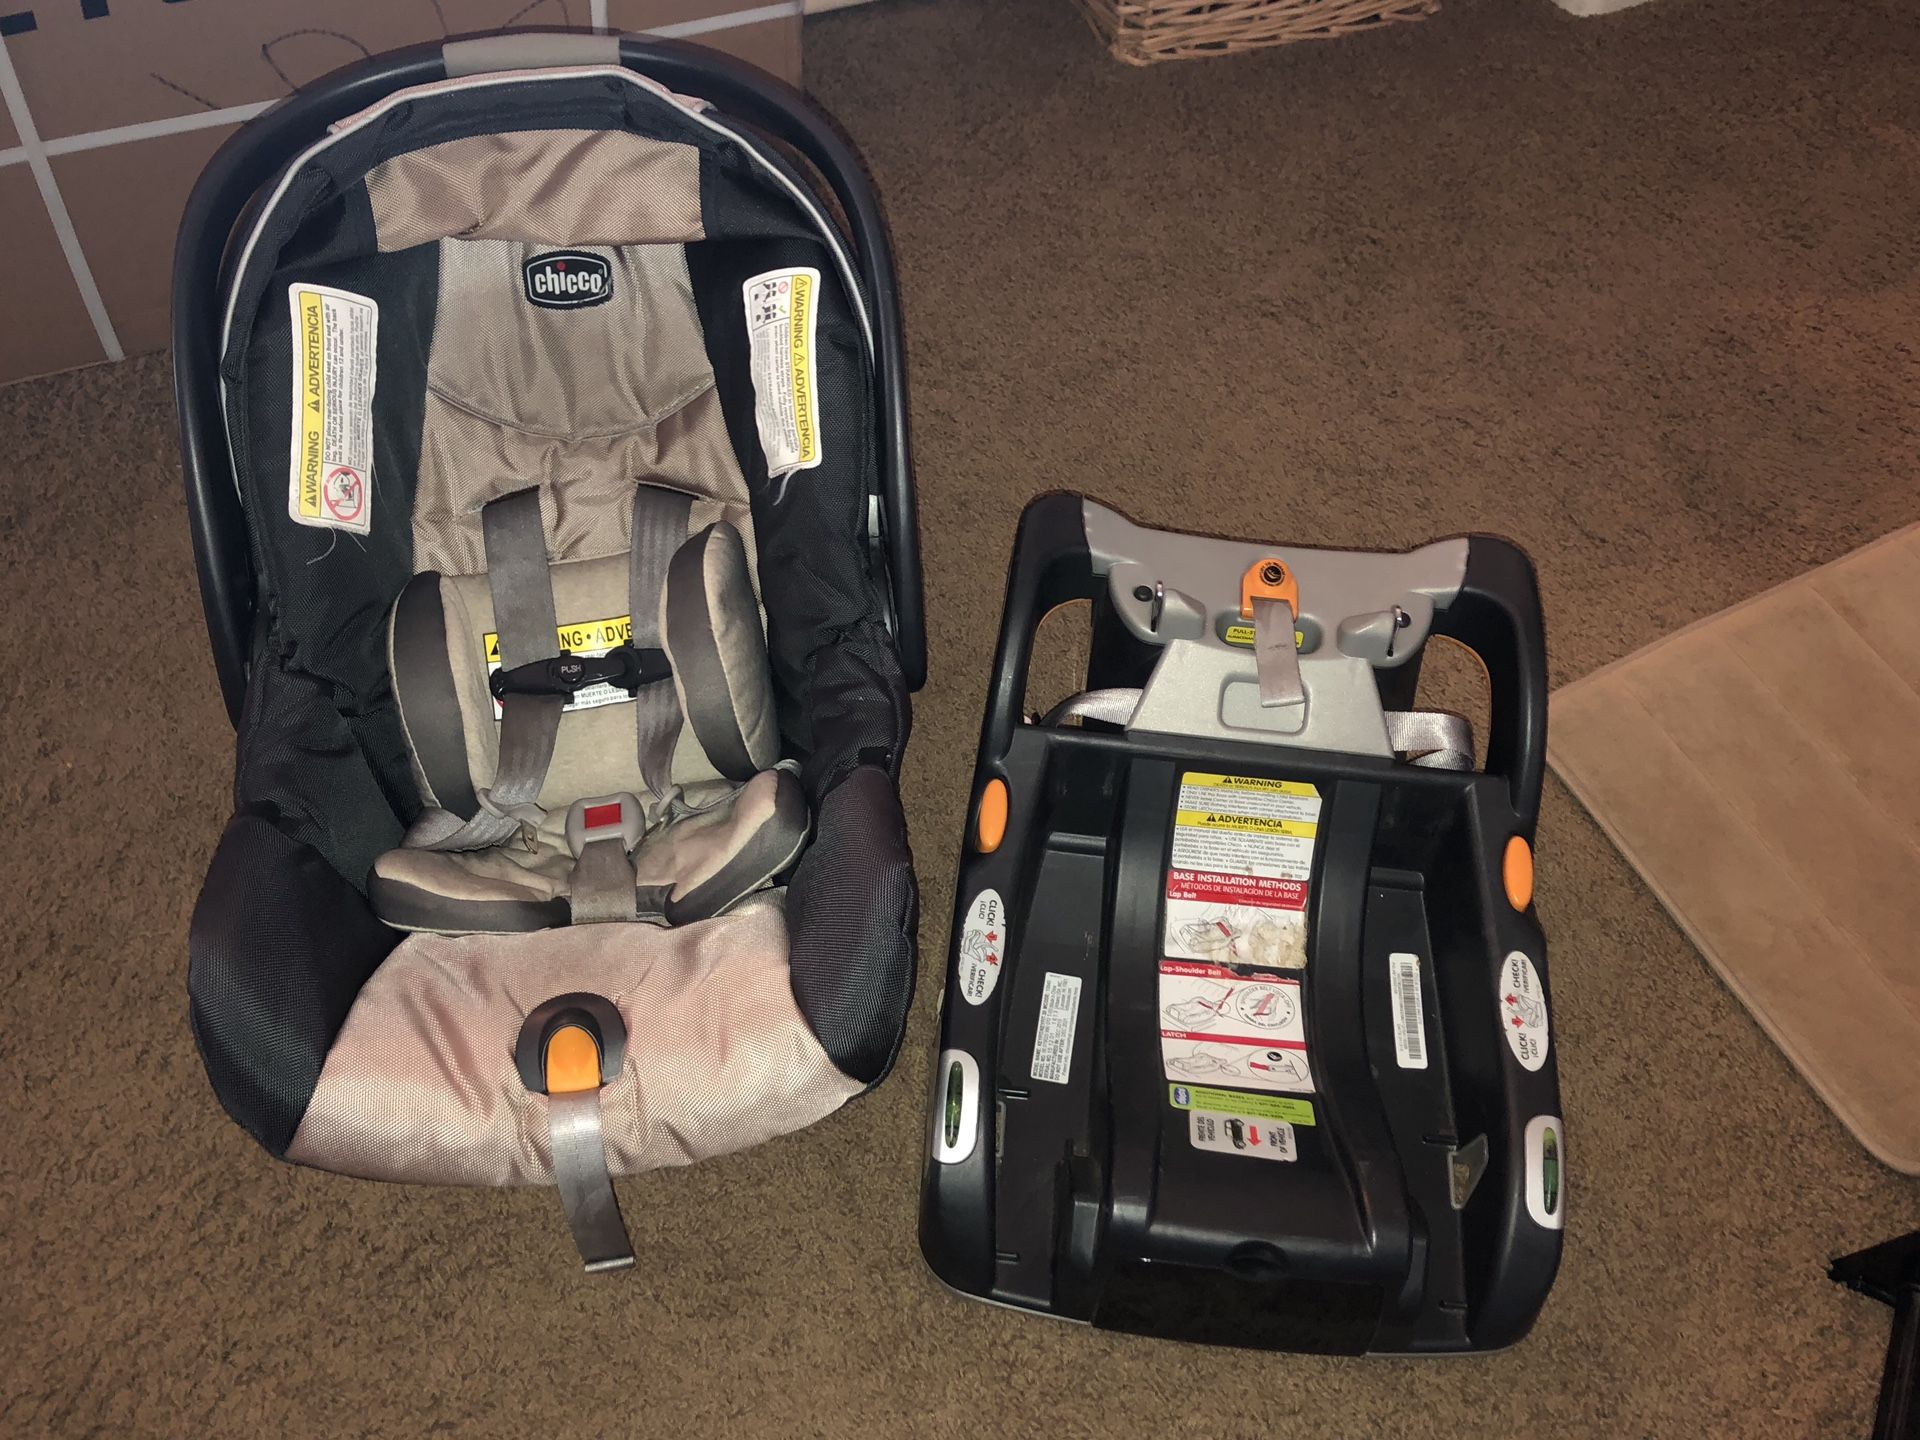 Infant car seat and base